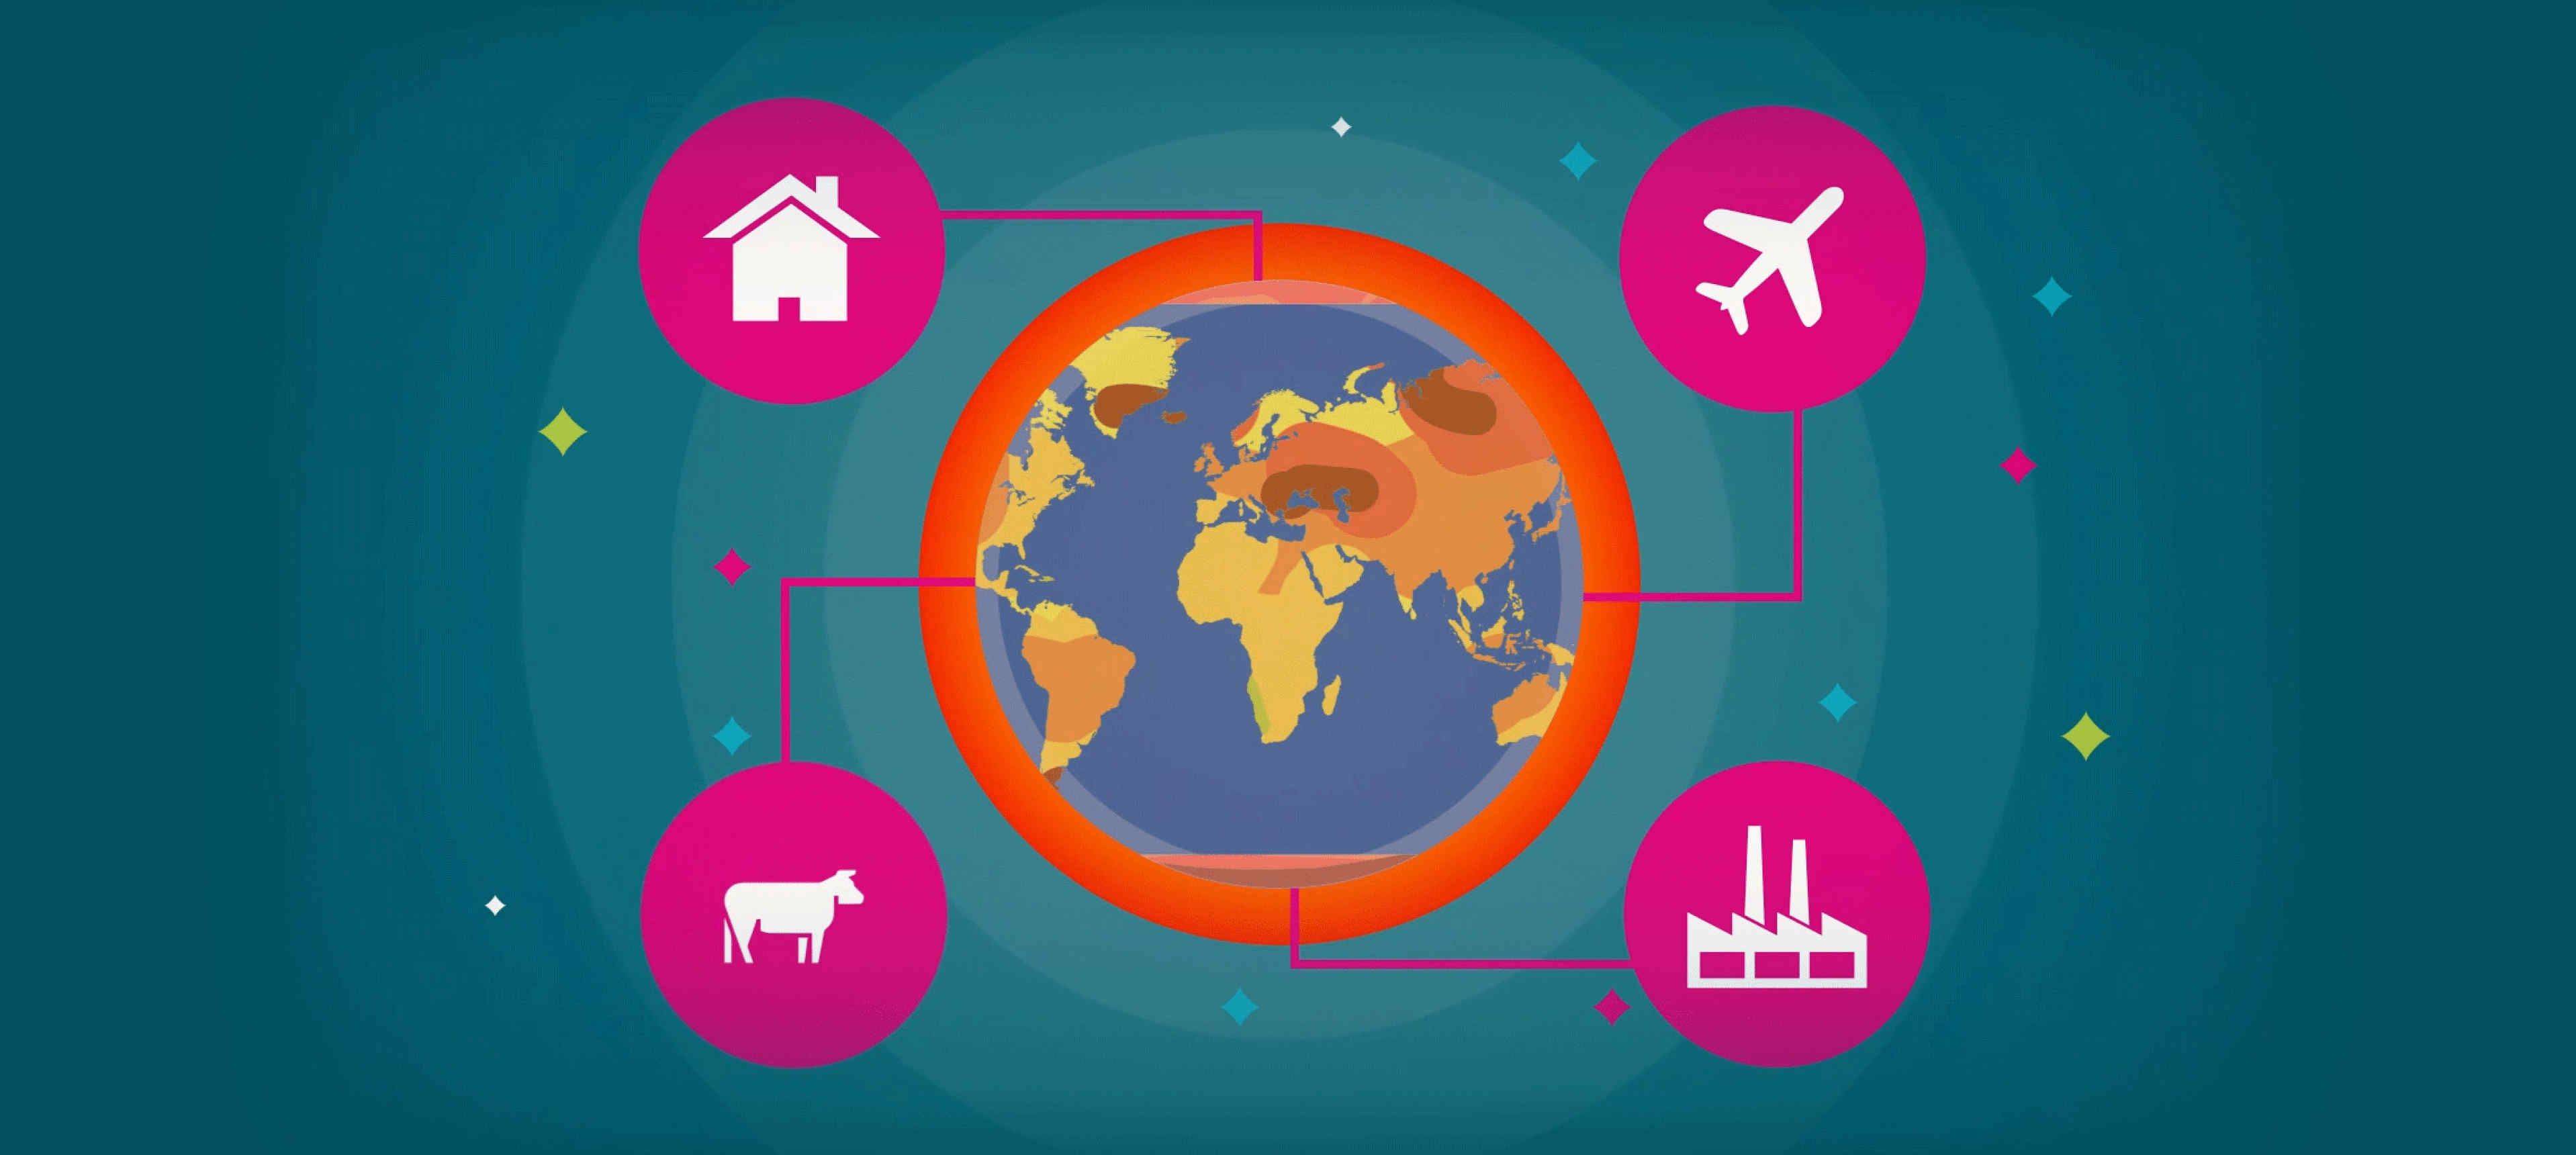 animation of globe with a red circle around it and icons showing housing aviation animals and factories